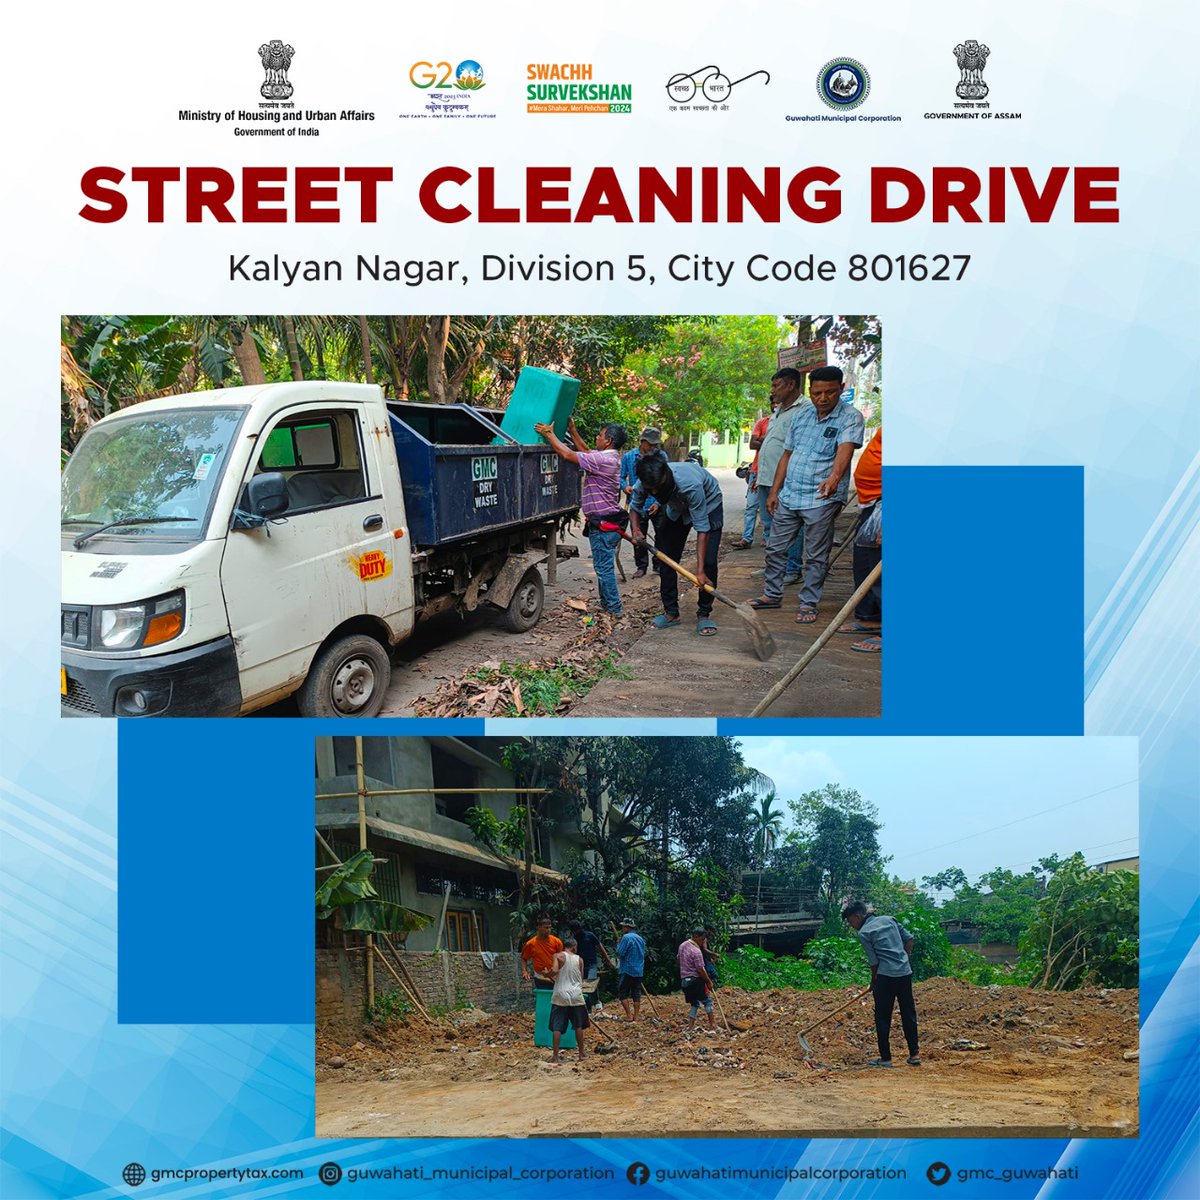 Cleanliness drive sweeps through residential areas of Guwahati! #GMC takes the lead in Kalyan Nagar, Division 5, city code 801627, to ensure a #GarbageFree city for all! Let's join hands for a cleaner, healthier Guwahati!
#MyGMCMyGuwahati #GuwahatiVsGarbage #CleanCityGreenCity